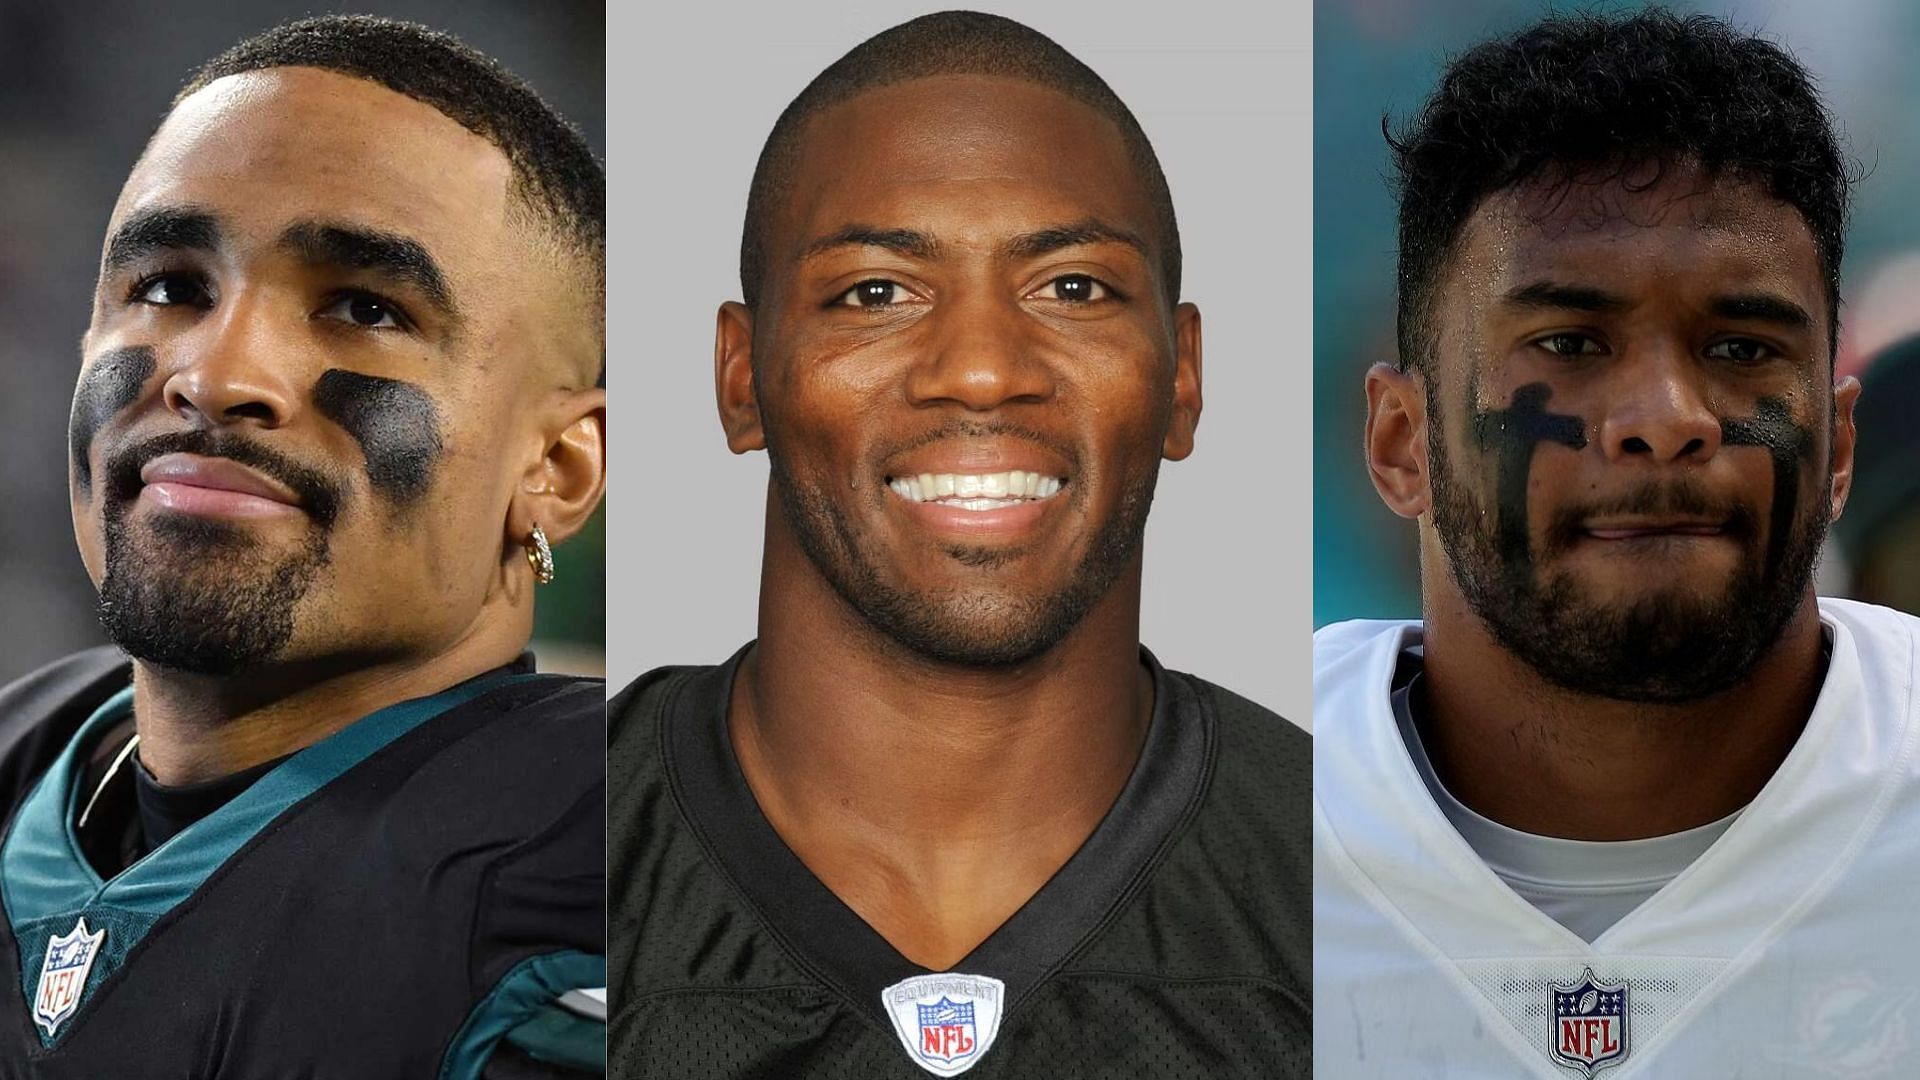 NFL analyst Ryan Clark (middle) called out the likes of Jalen Hurts (left) and Tua Tagovailoa (right) for declining to be featured on the Netflix sports documentary series &quot;Quarterback.&quot;